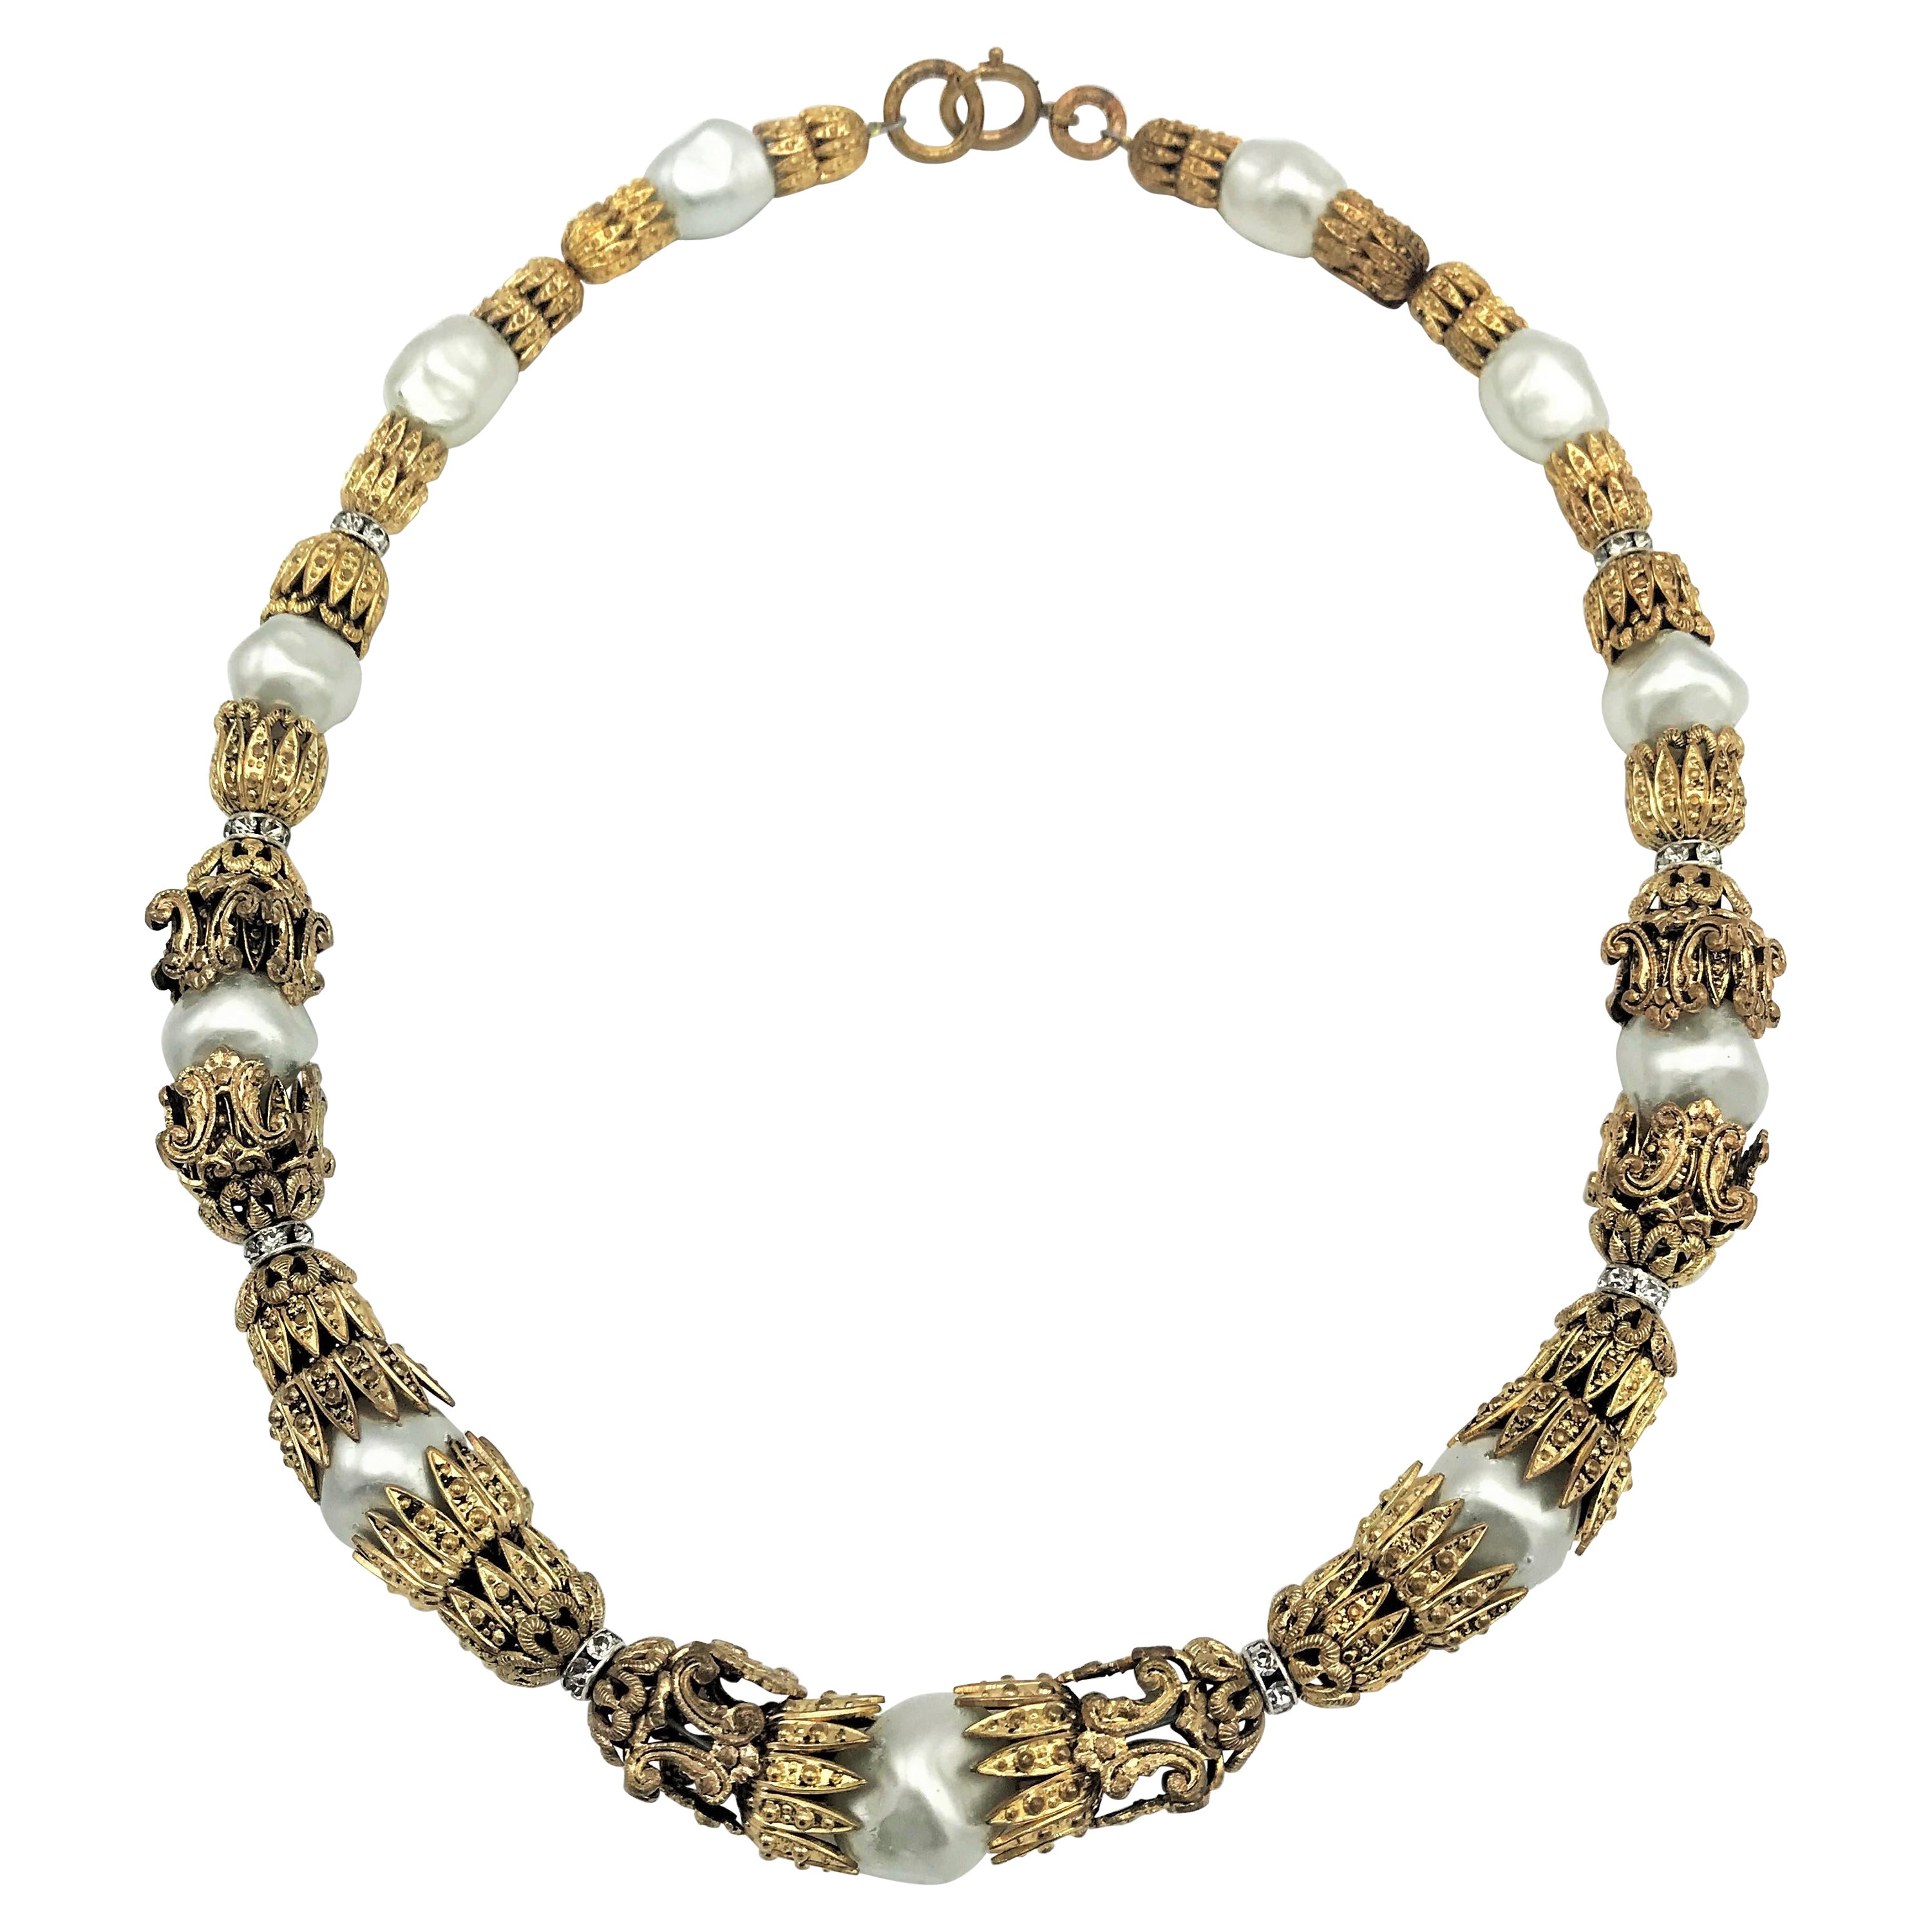 Sold at Auction: Chanel 1984 Gripoix Glass Gold Tone Necklace